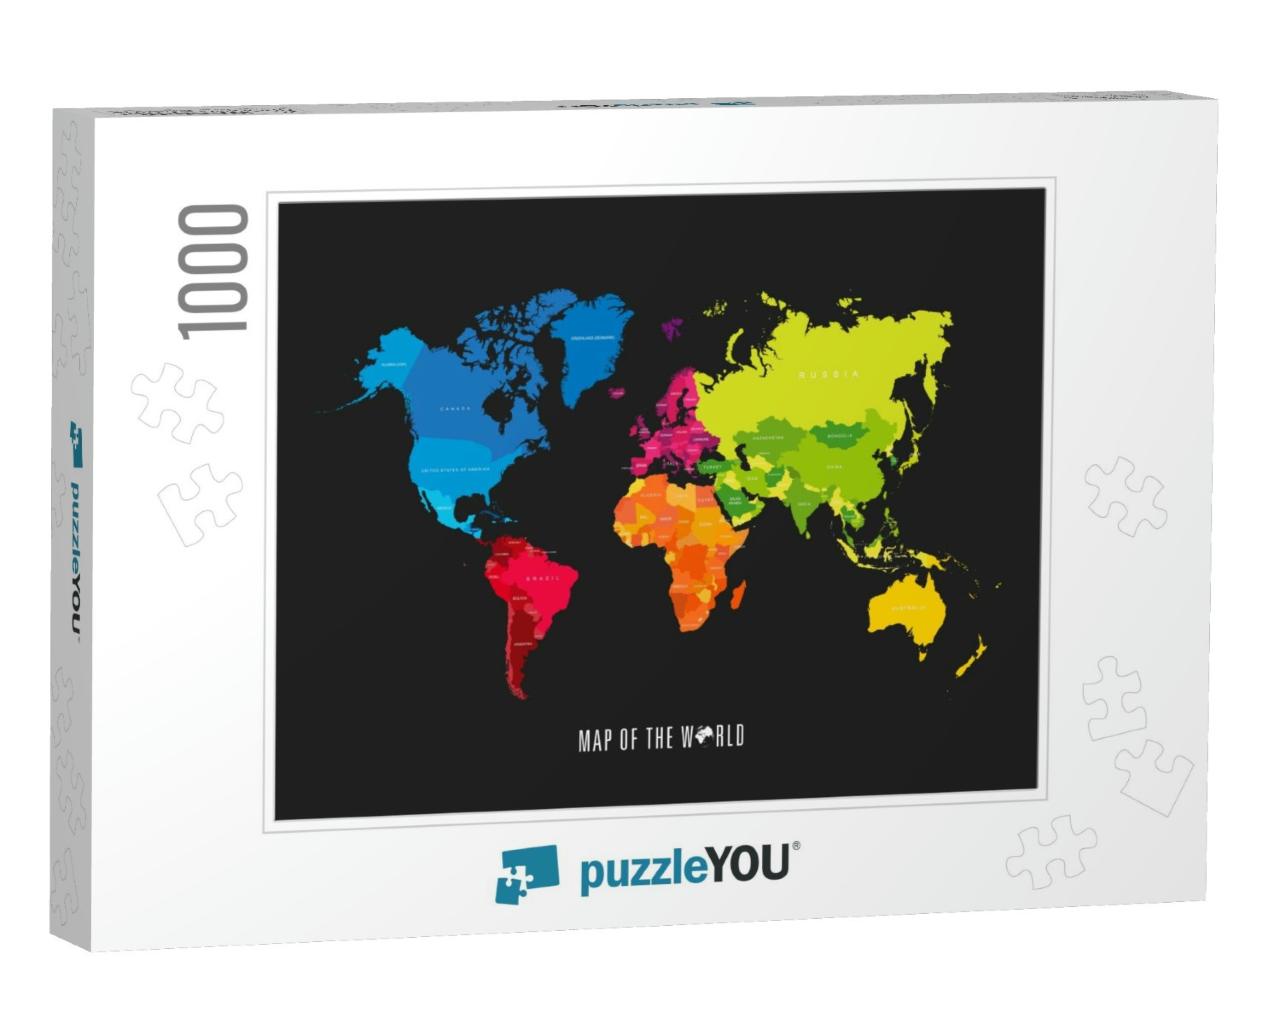 World Map with Different Colored Continents - Illustratio... Jigsaw Puzzle with 1000 pieces